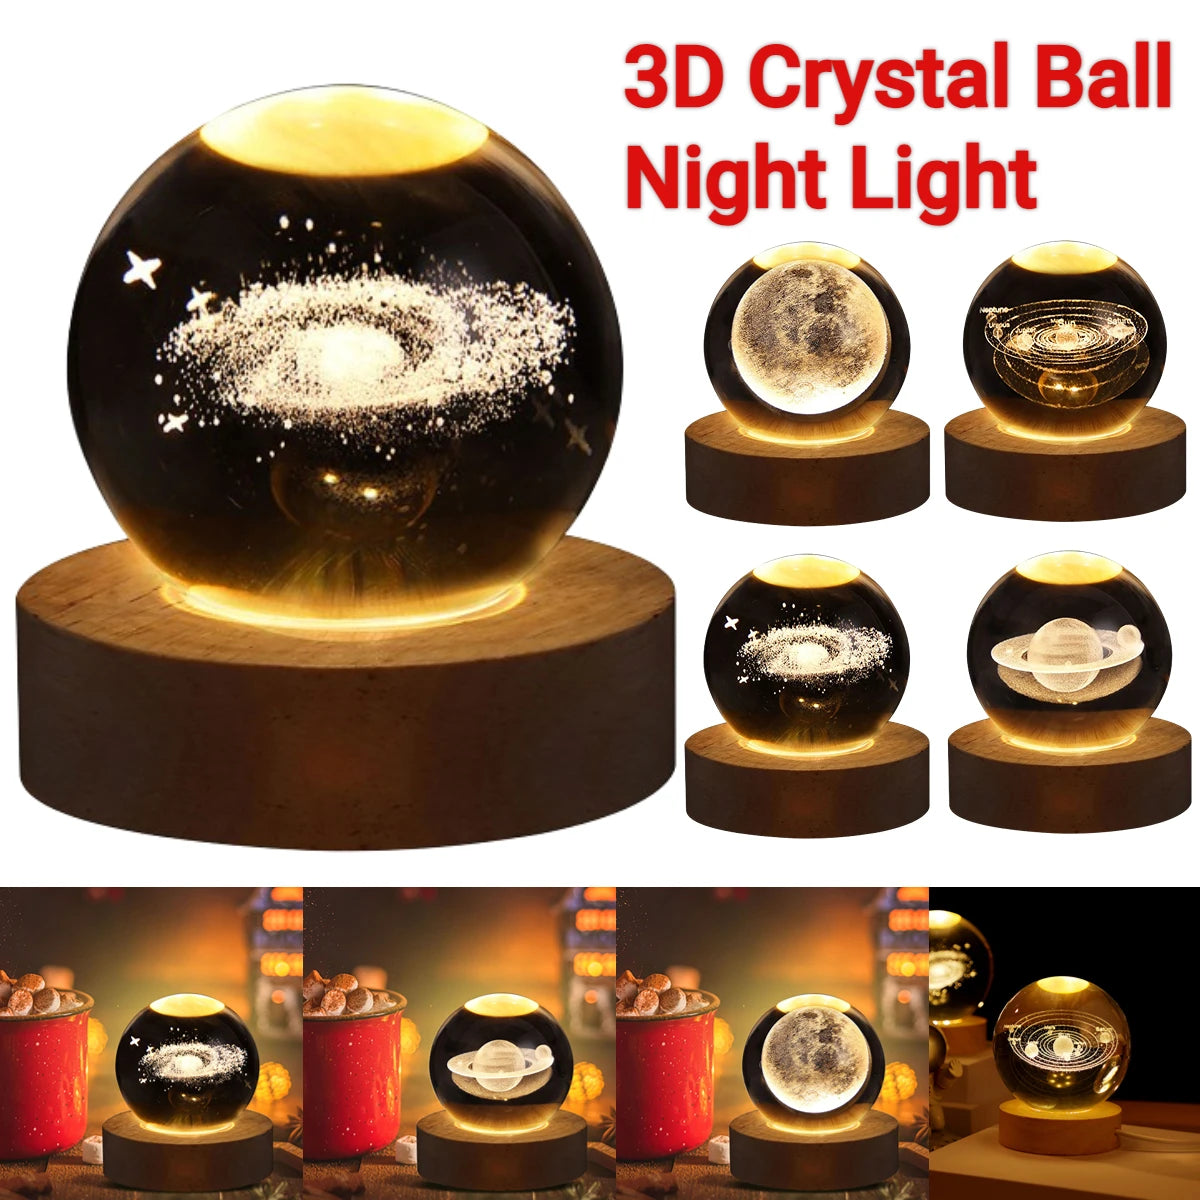 "Transform your bedroom with this USB LED Galaxy Crystal Ball Table Lamp! 🌌✨ Perfect for children's gifts and home decor. #NightLight #PlanetLamp"